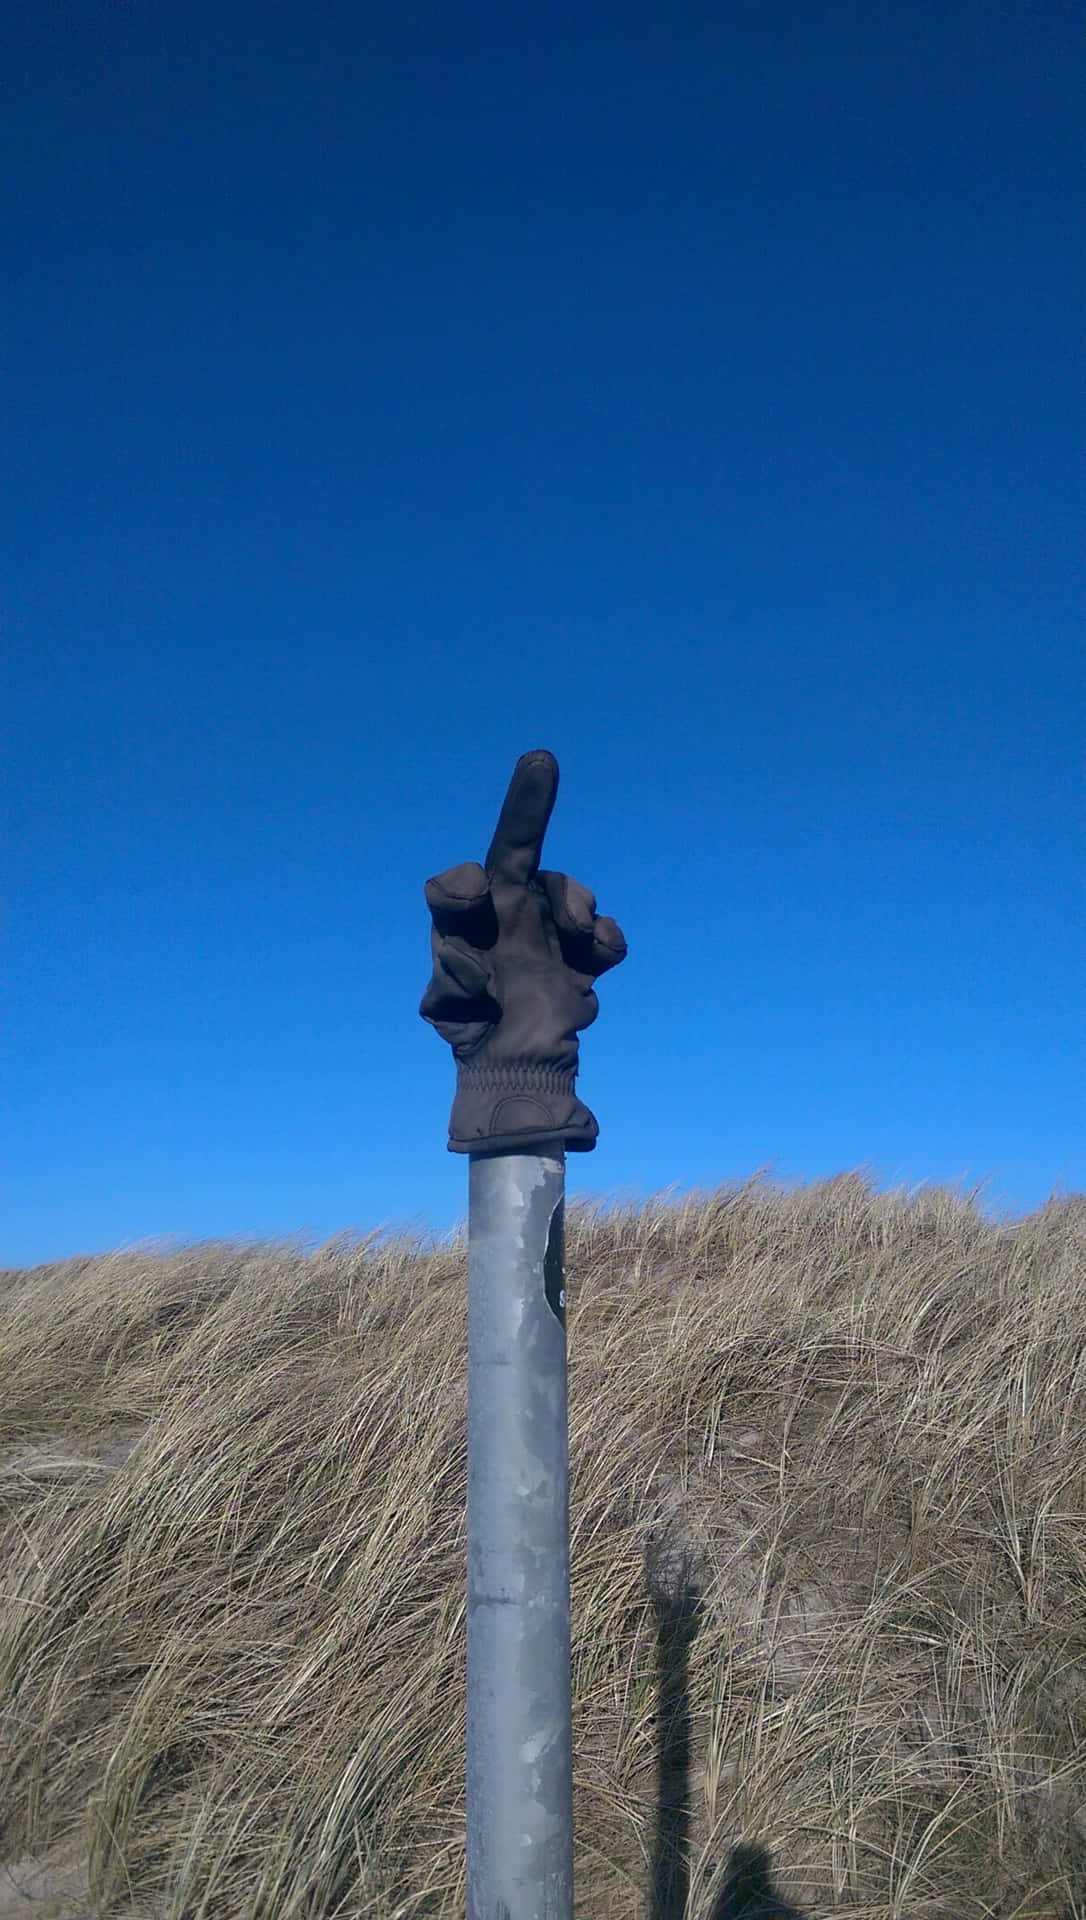 A Metal Pole With A Hand On It